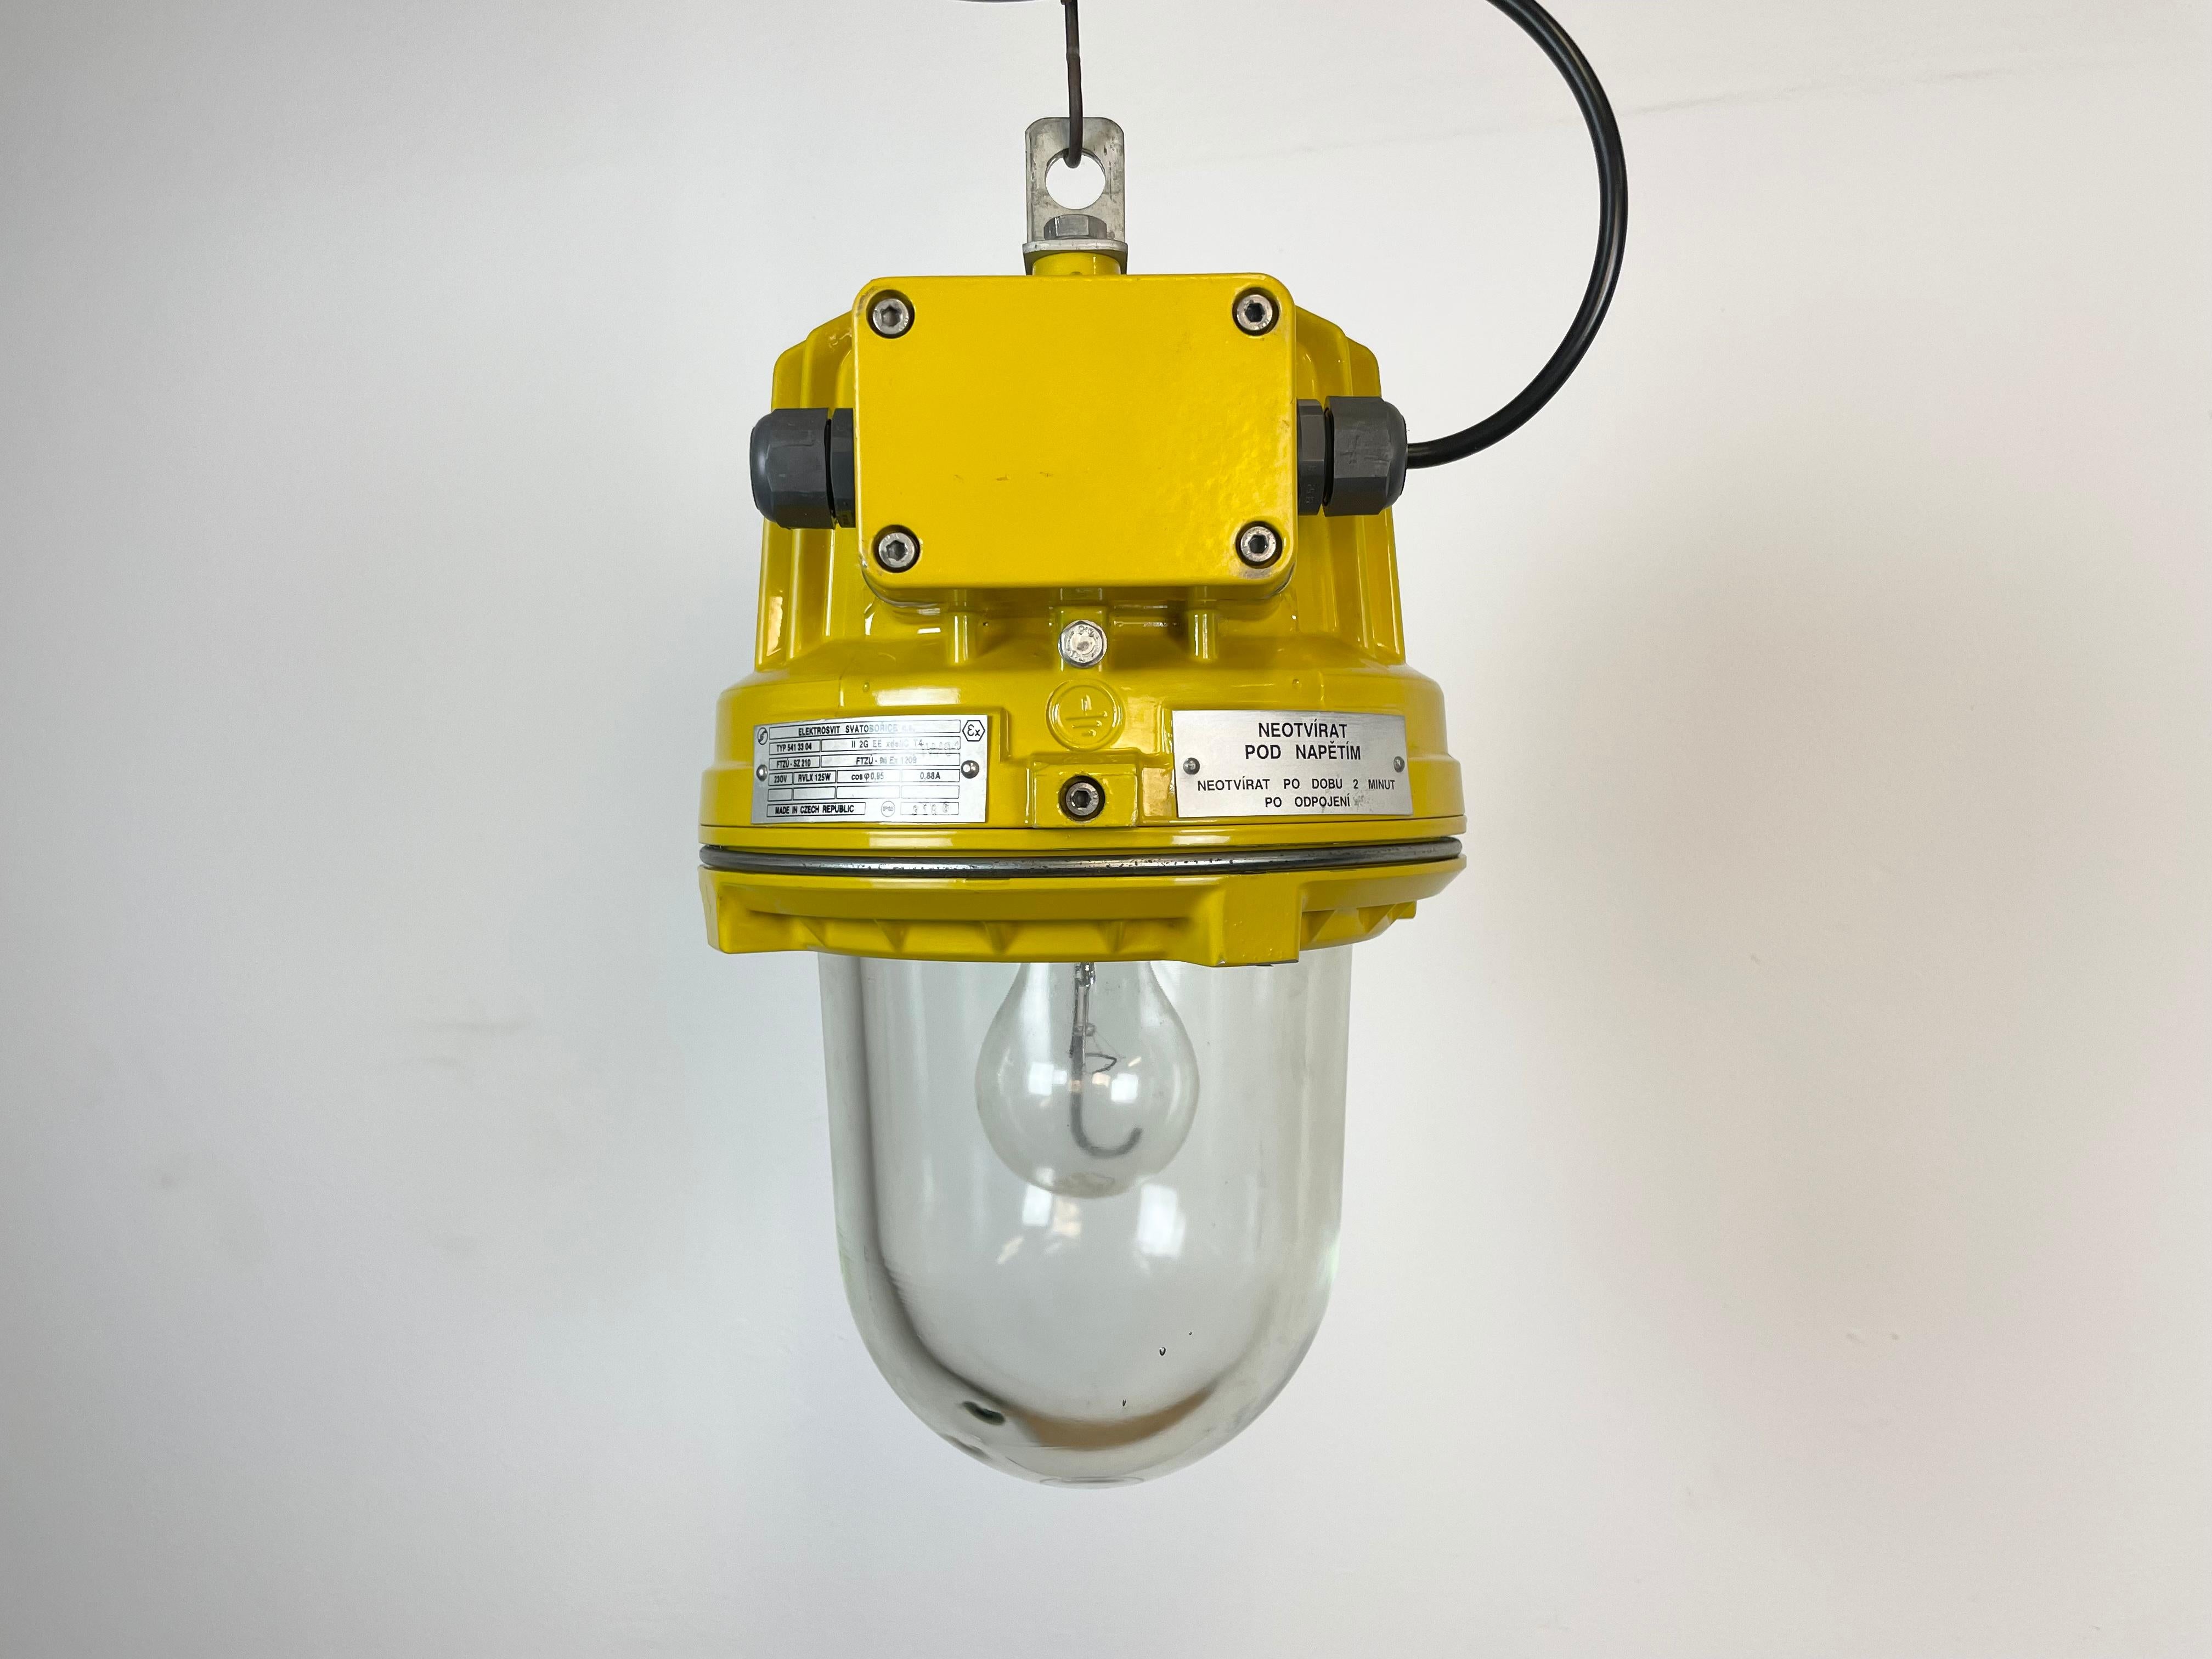 Industrial factory pendant light manufactured by Elektrosvit in Czech Republic during the 1990s. It features a cast aluminium body and explosion-proof glass.
The socket requires E27 lightbulbs. New wire. The weight of the lamp is 10 kg.